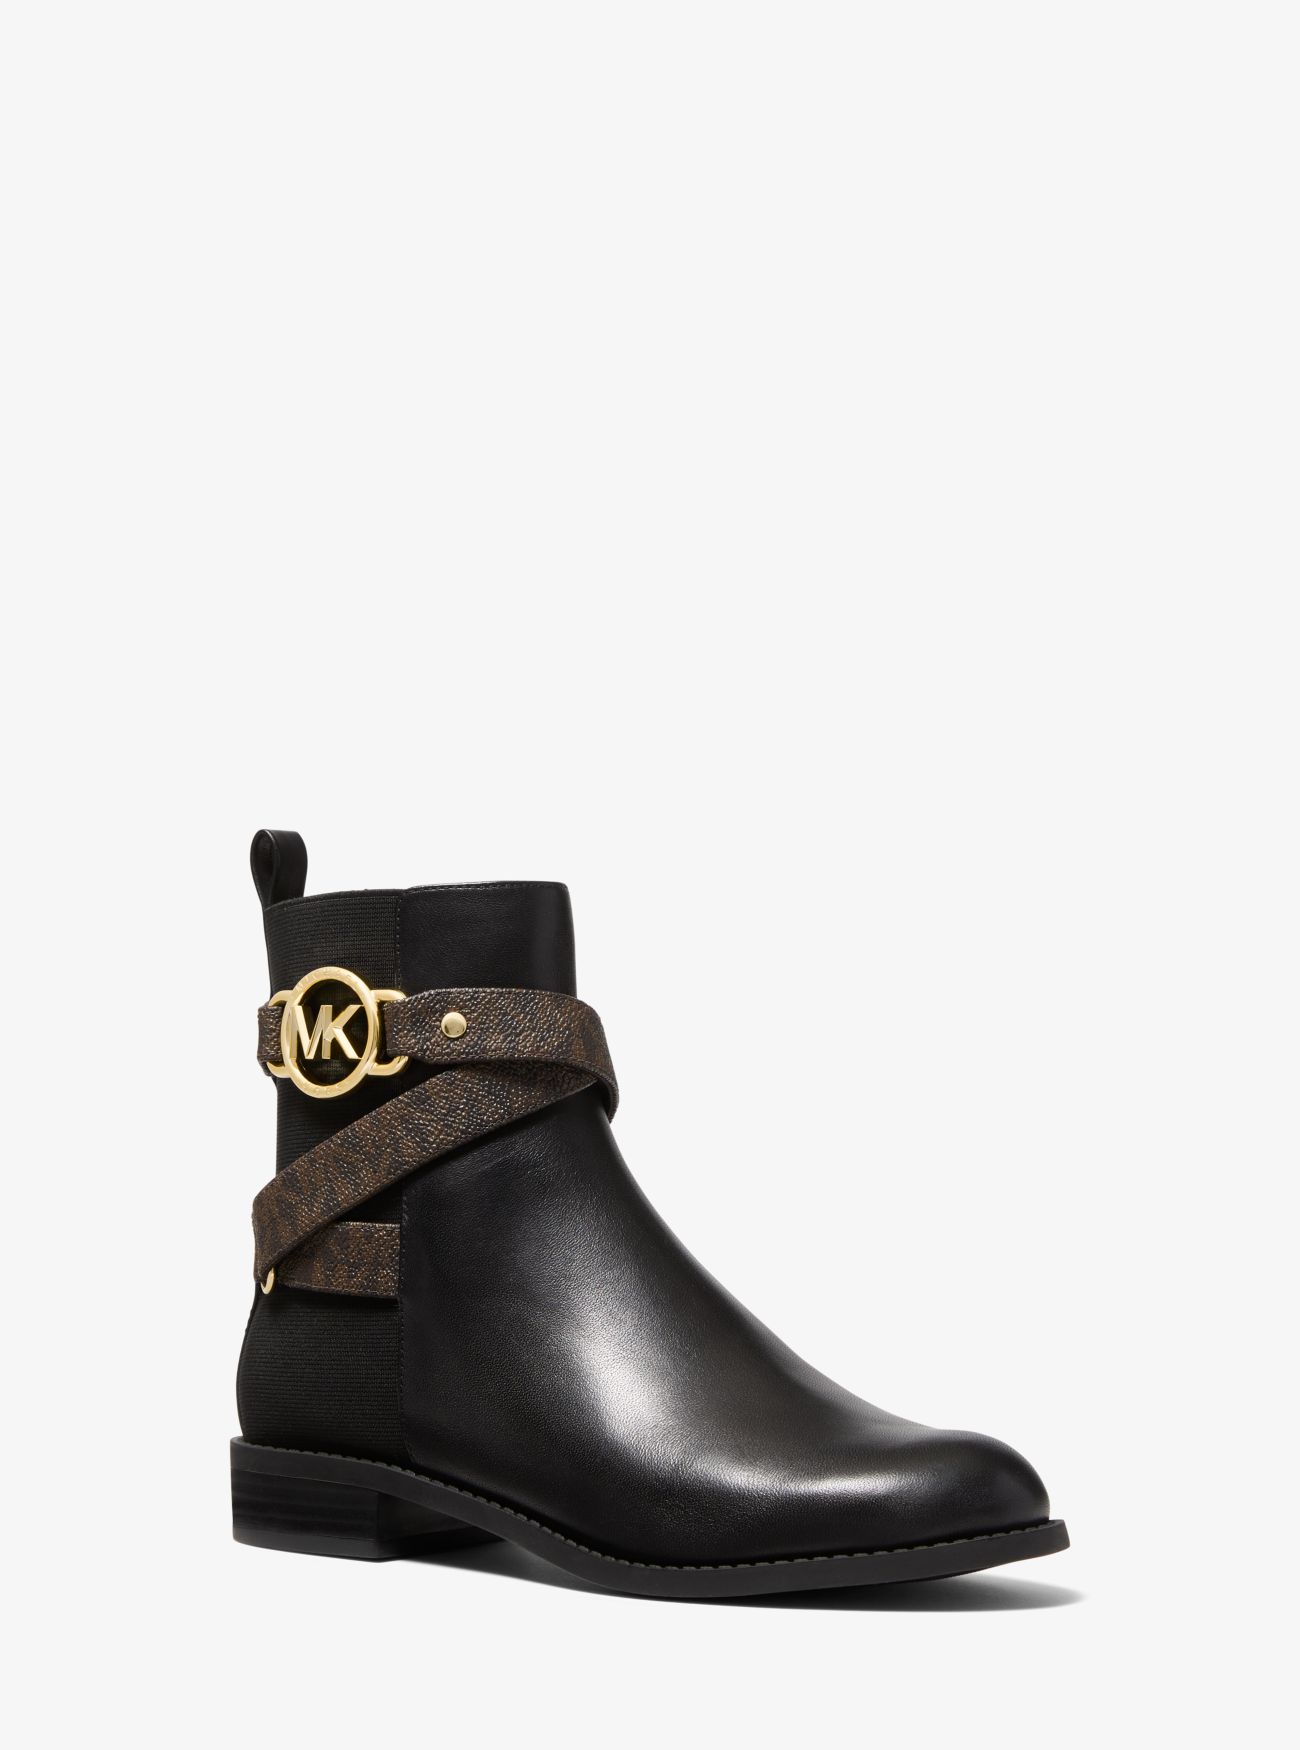 MK Rory Logo and Leather Ankle Boot - Blk/brown - Michael Kors